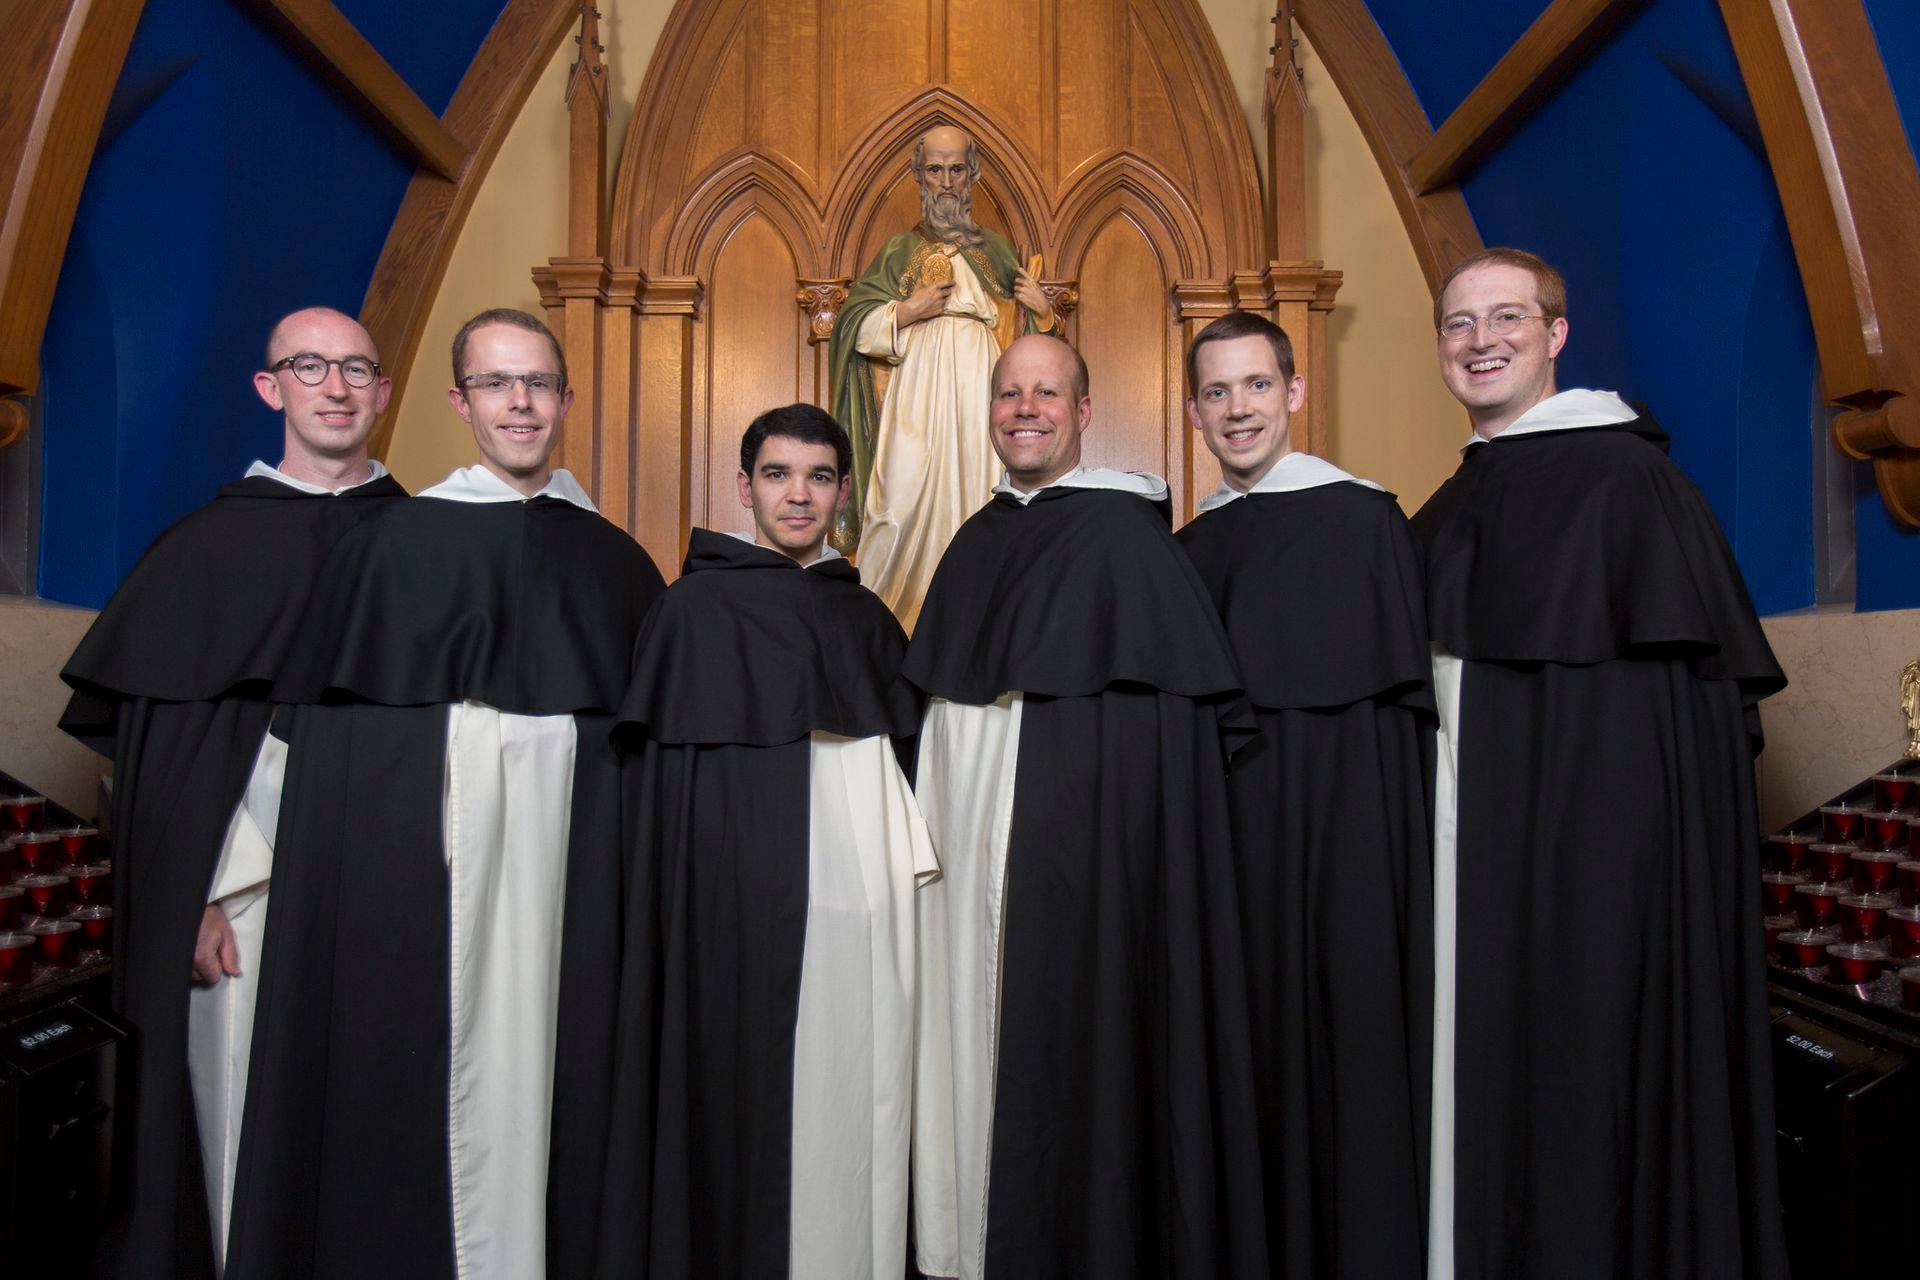 Meet the Men who are Praying for Your Intentions